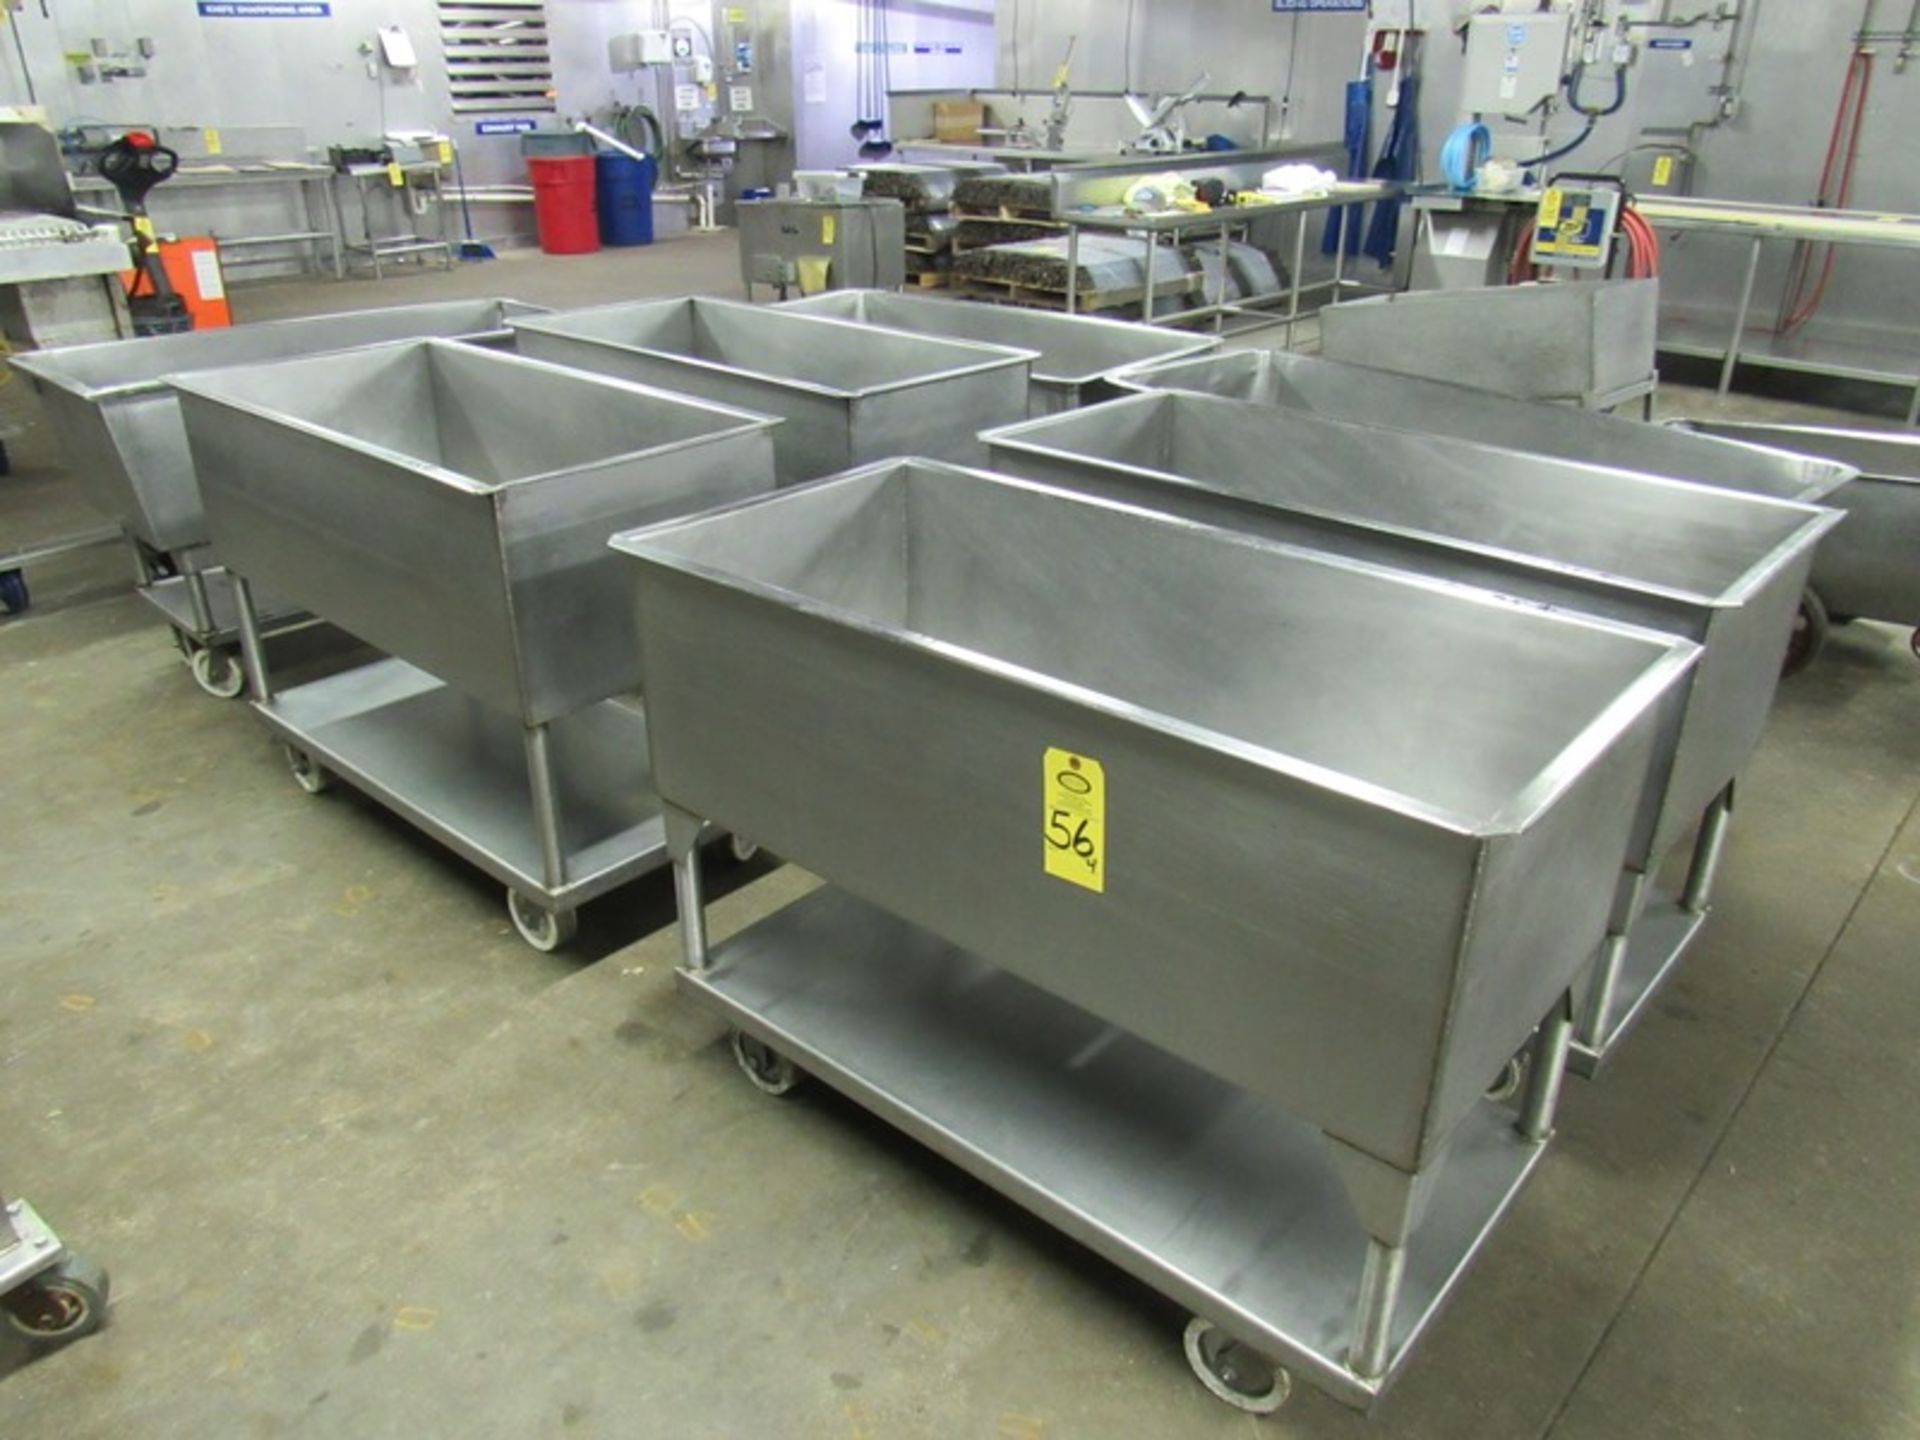 Stainless Steel Meat Trucks, 22" W X 4' L X 16" D (All Funds Must Be Received by Friday, August 9th.